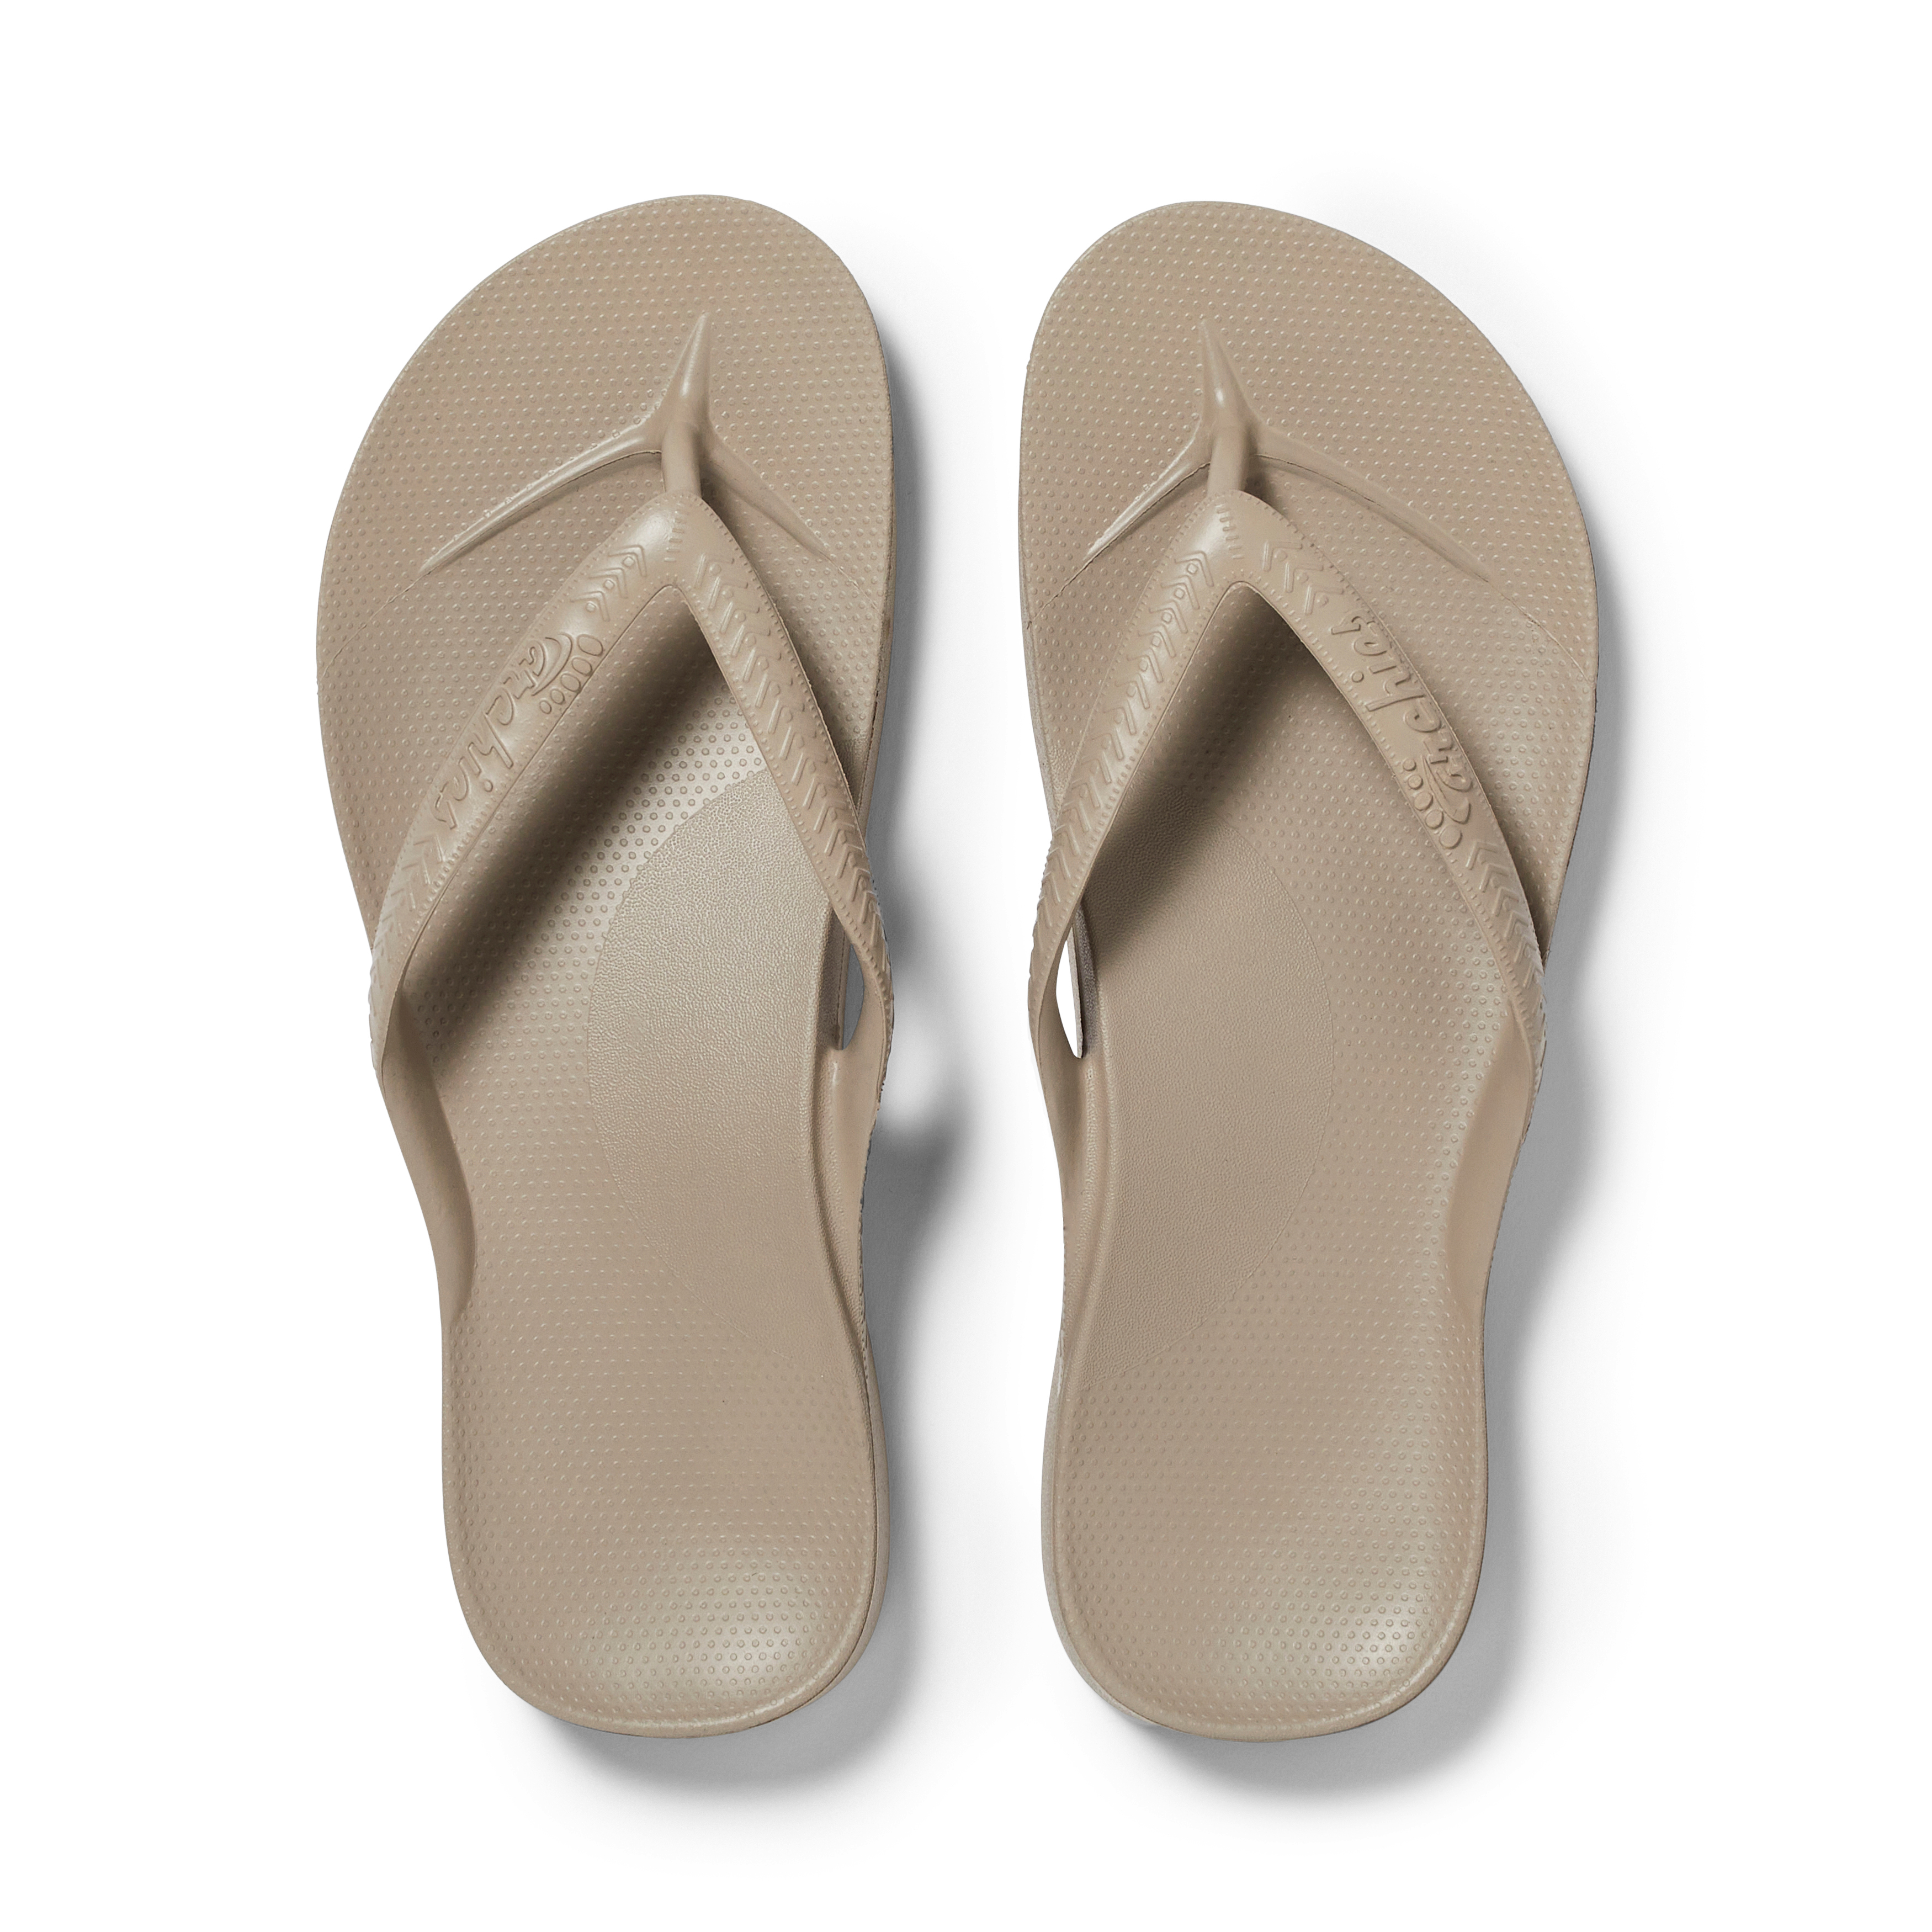 ARCHIES Footwear - Flip Flop Sandals – Offering Great Arch Support and